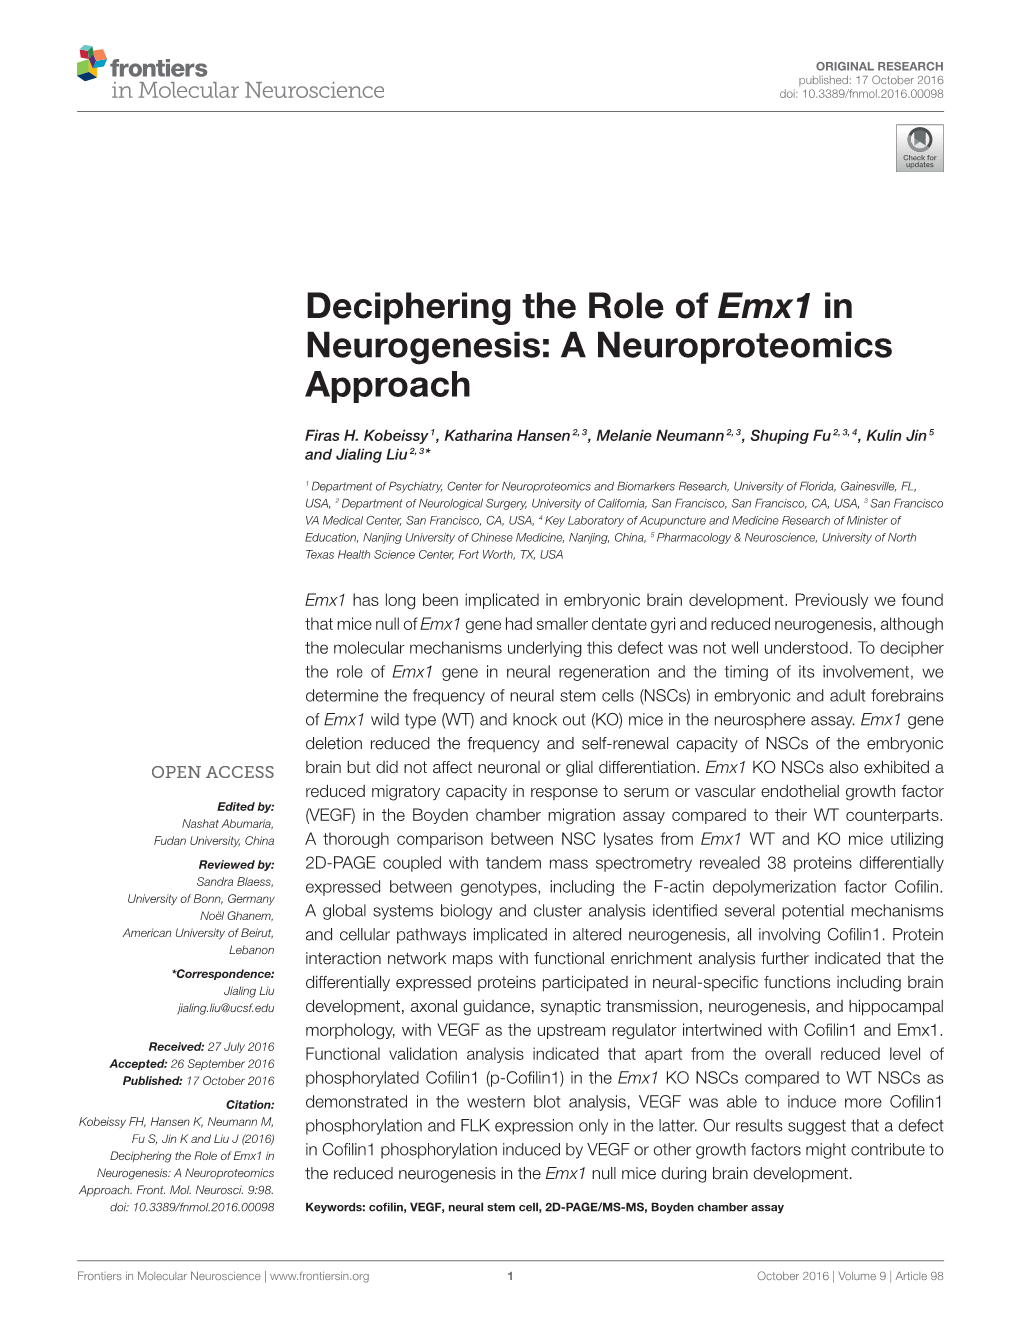 Deciphering the Role of Emx1 in Neurogenesis: a Neuroproteomics Approach